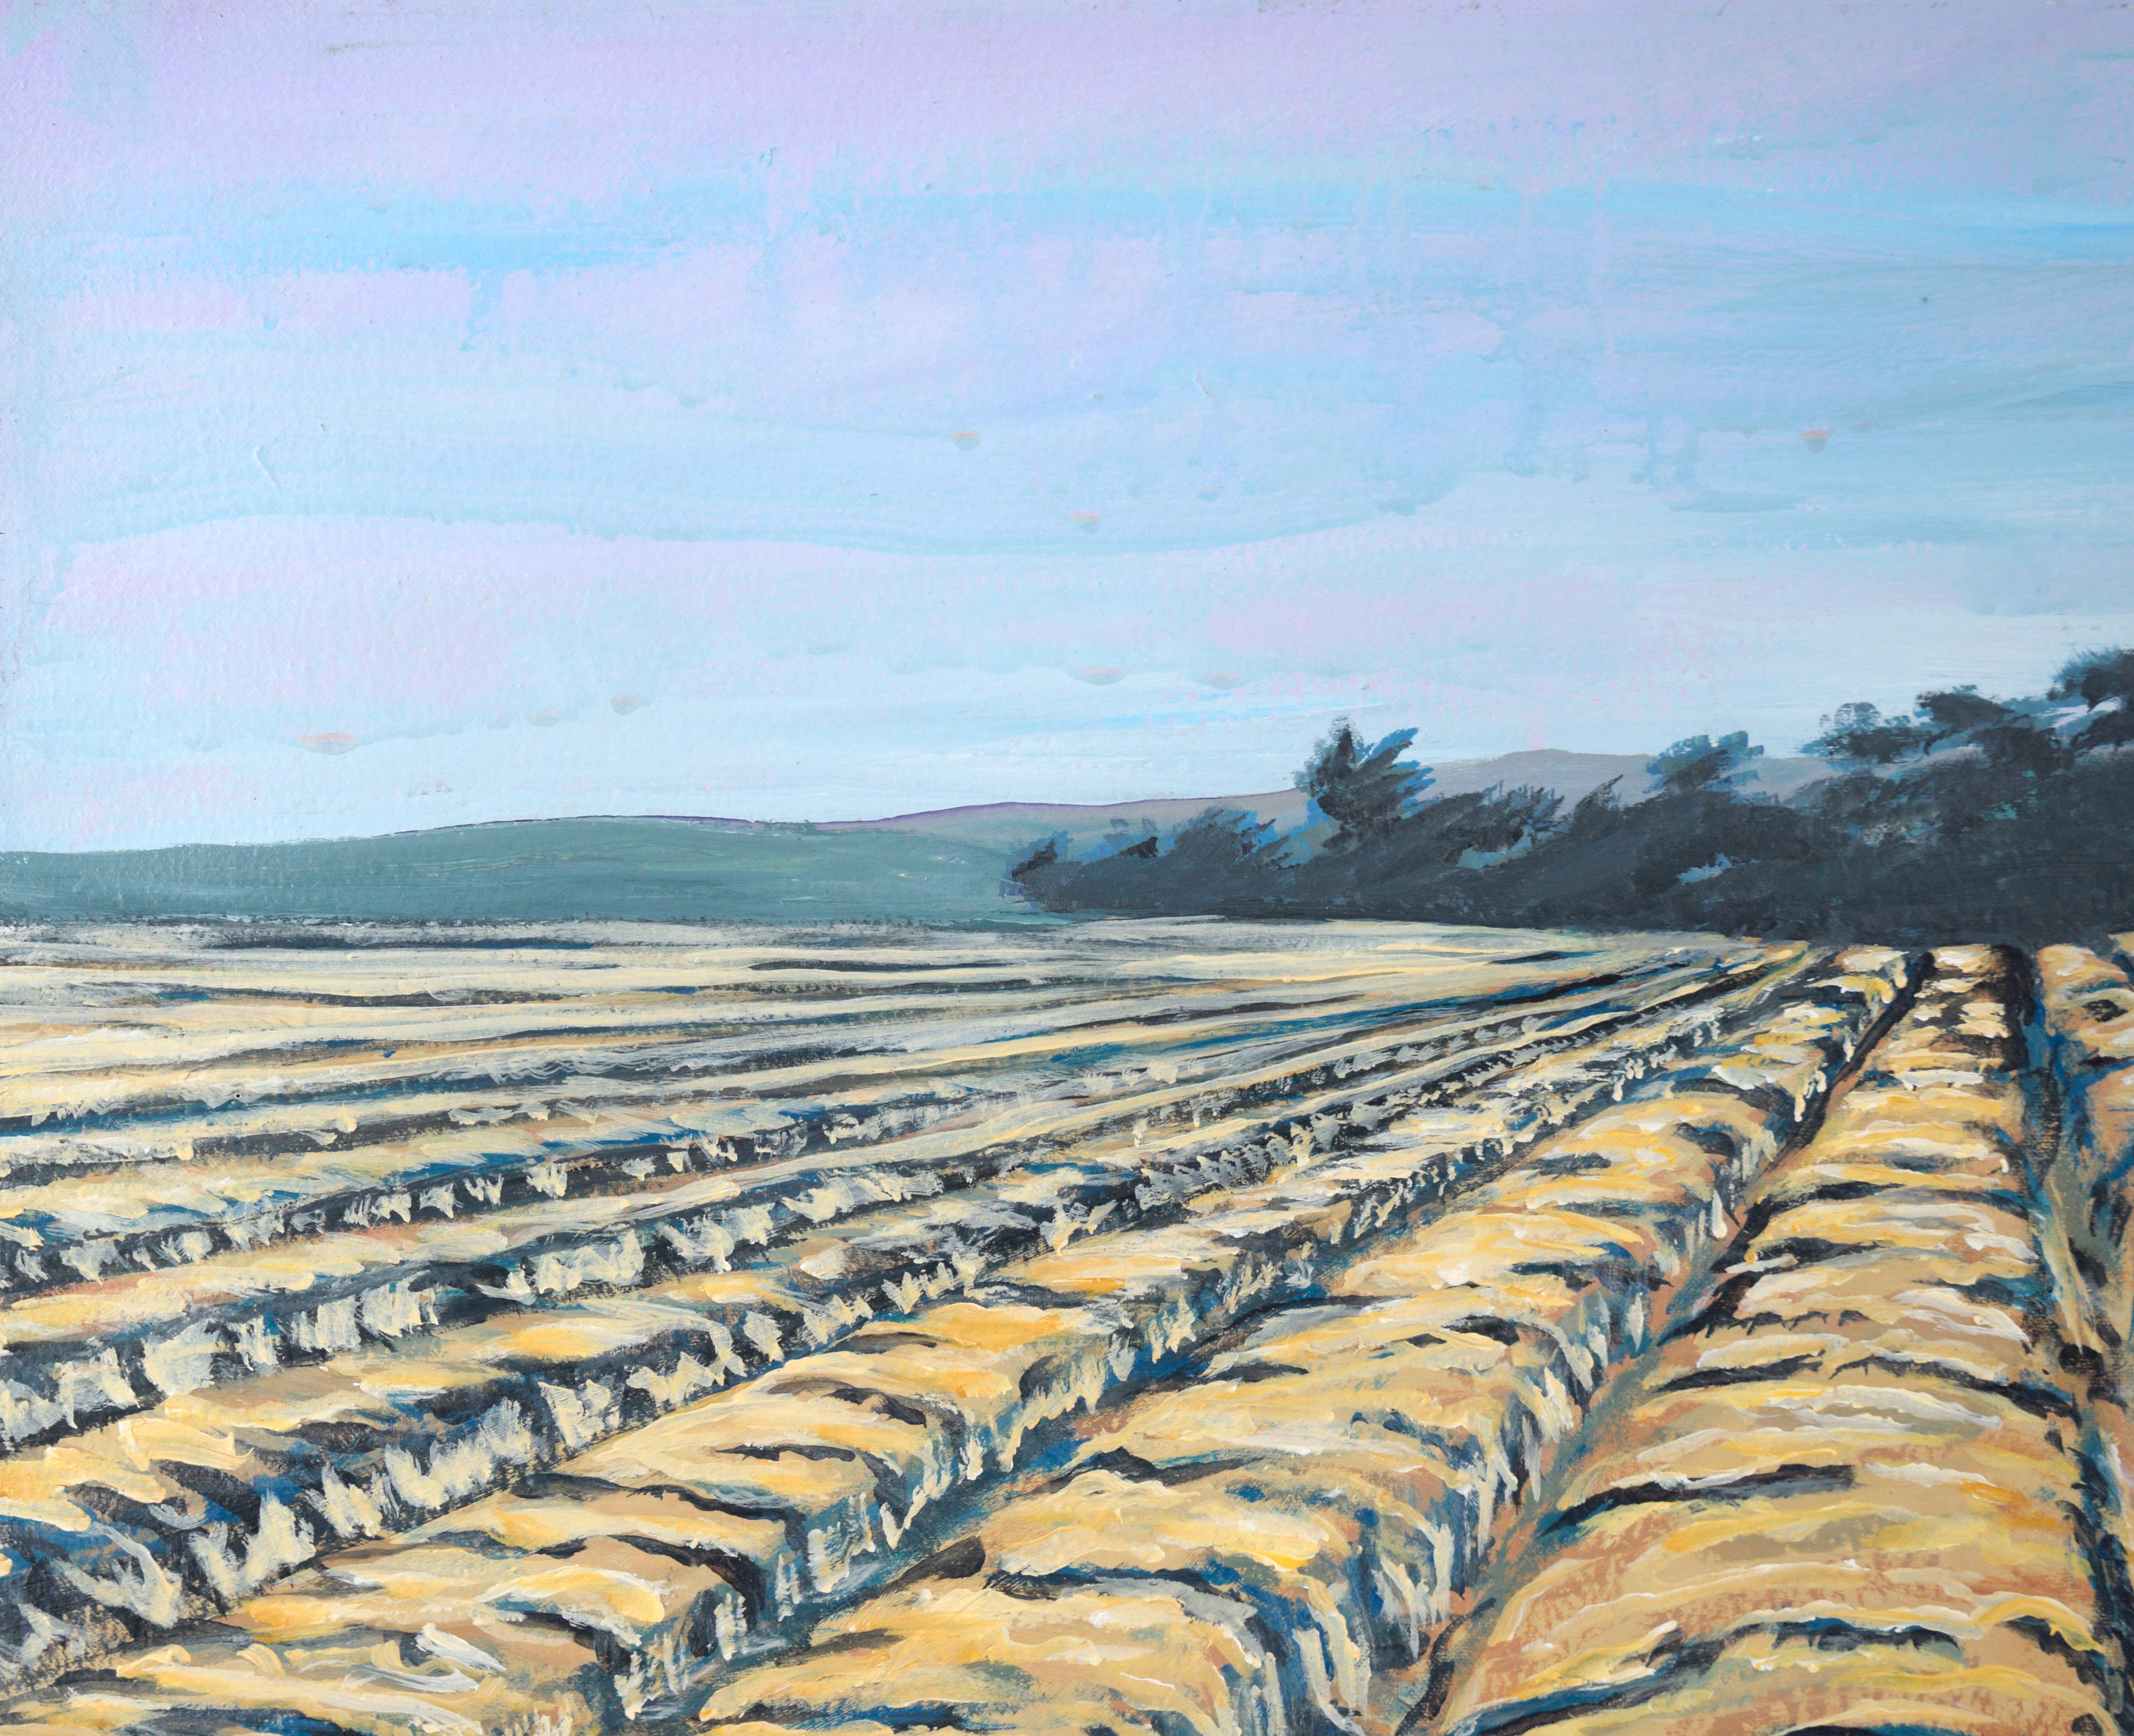 Moss Landing Farm Landscape in Acrylic on Canvas - Painting by Unknown